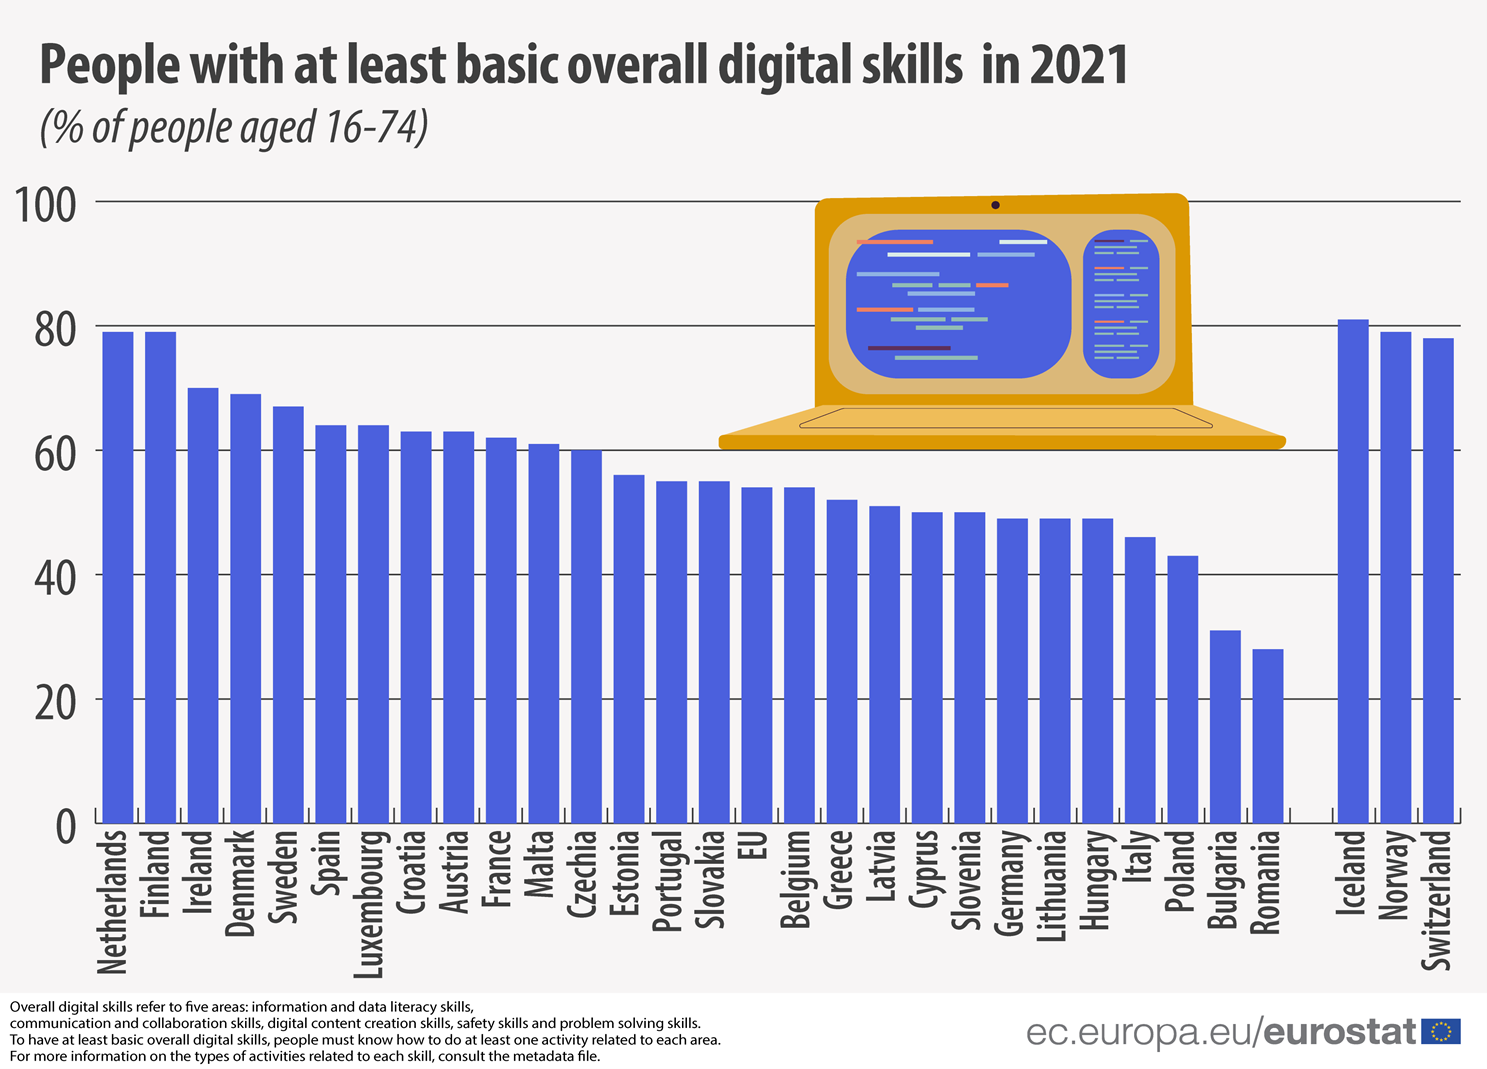 EU citizens with at least basic digital skills per country 